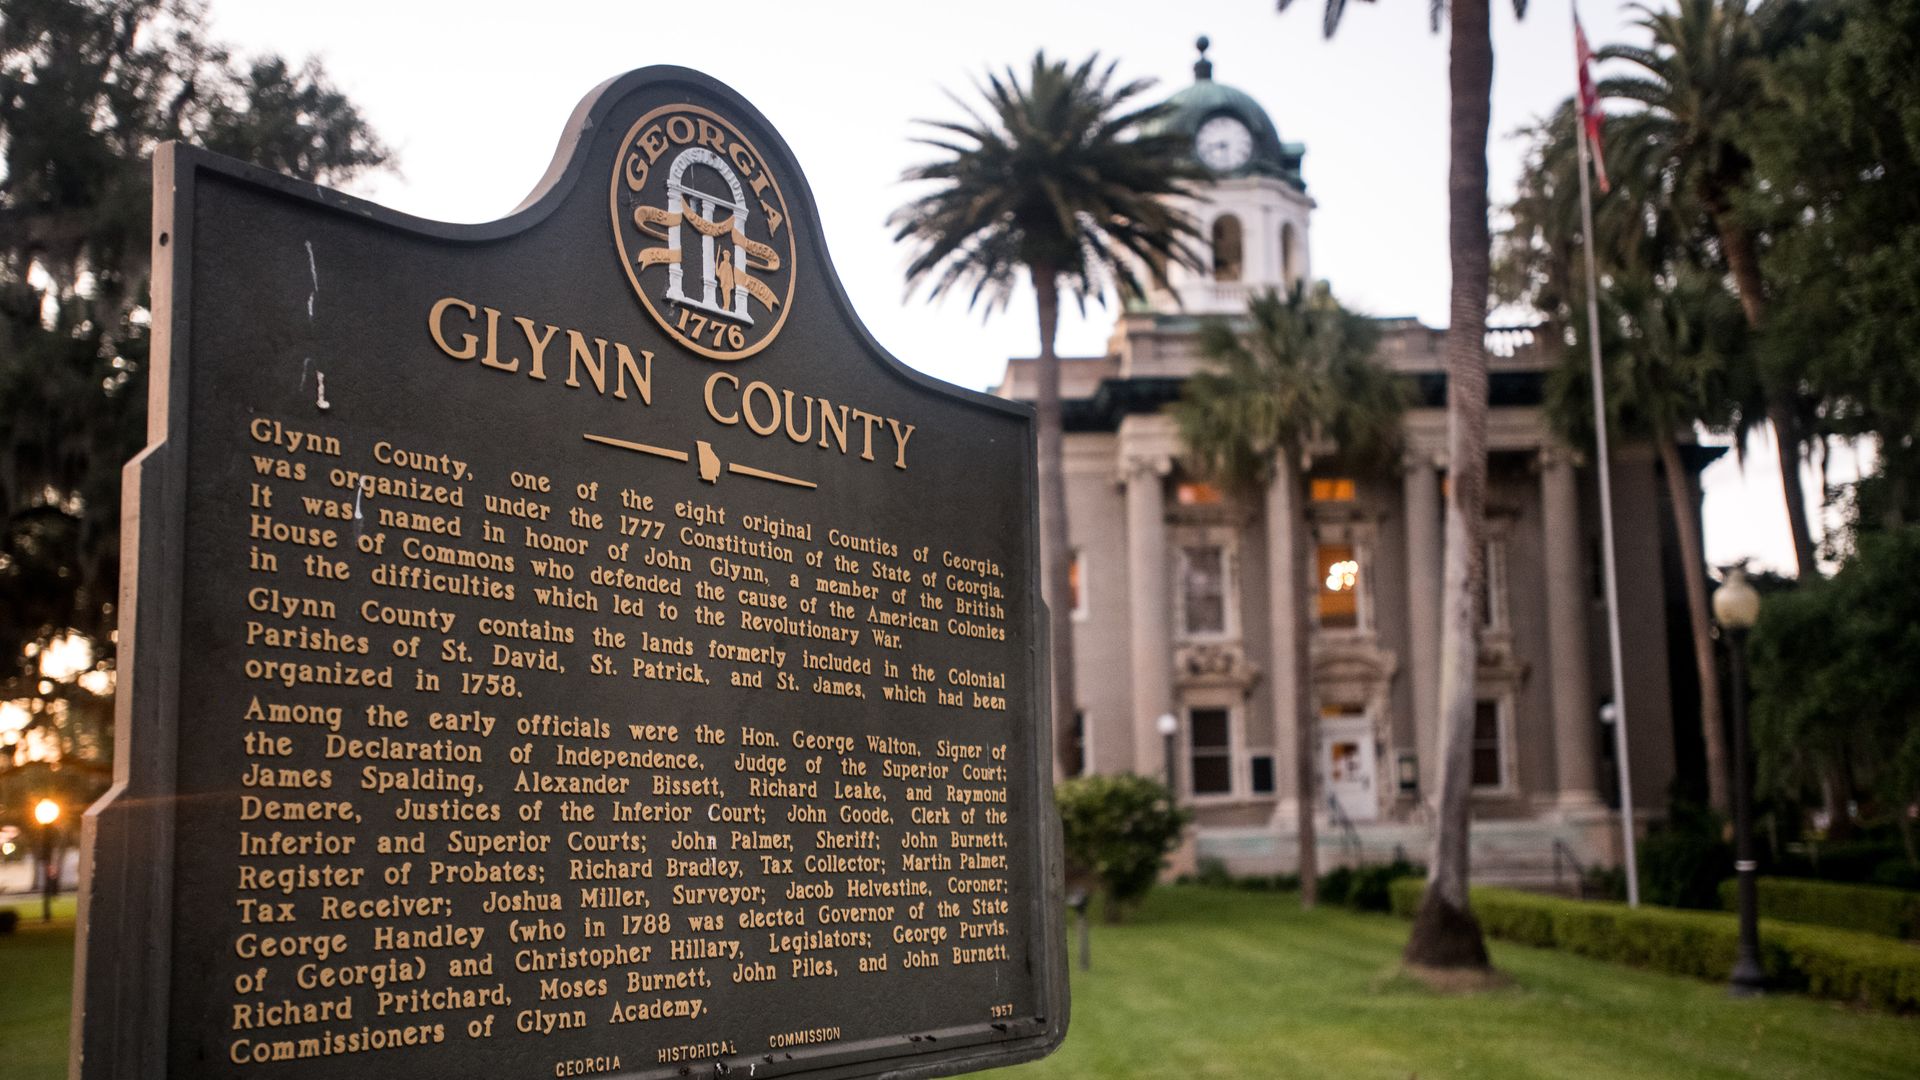 A marker stands in front of the historic Glynn County courthouse May 6, 2020 in Brunswick, Georgia